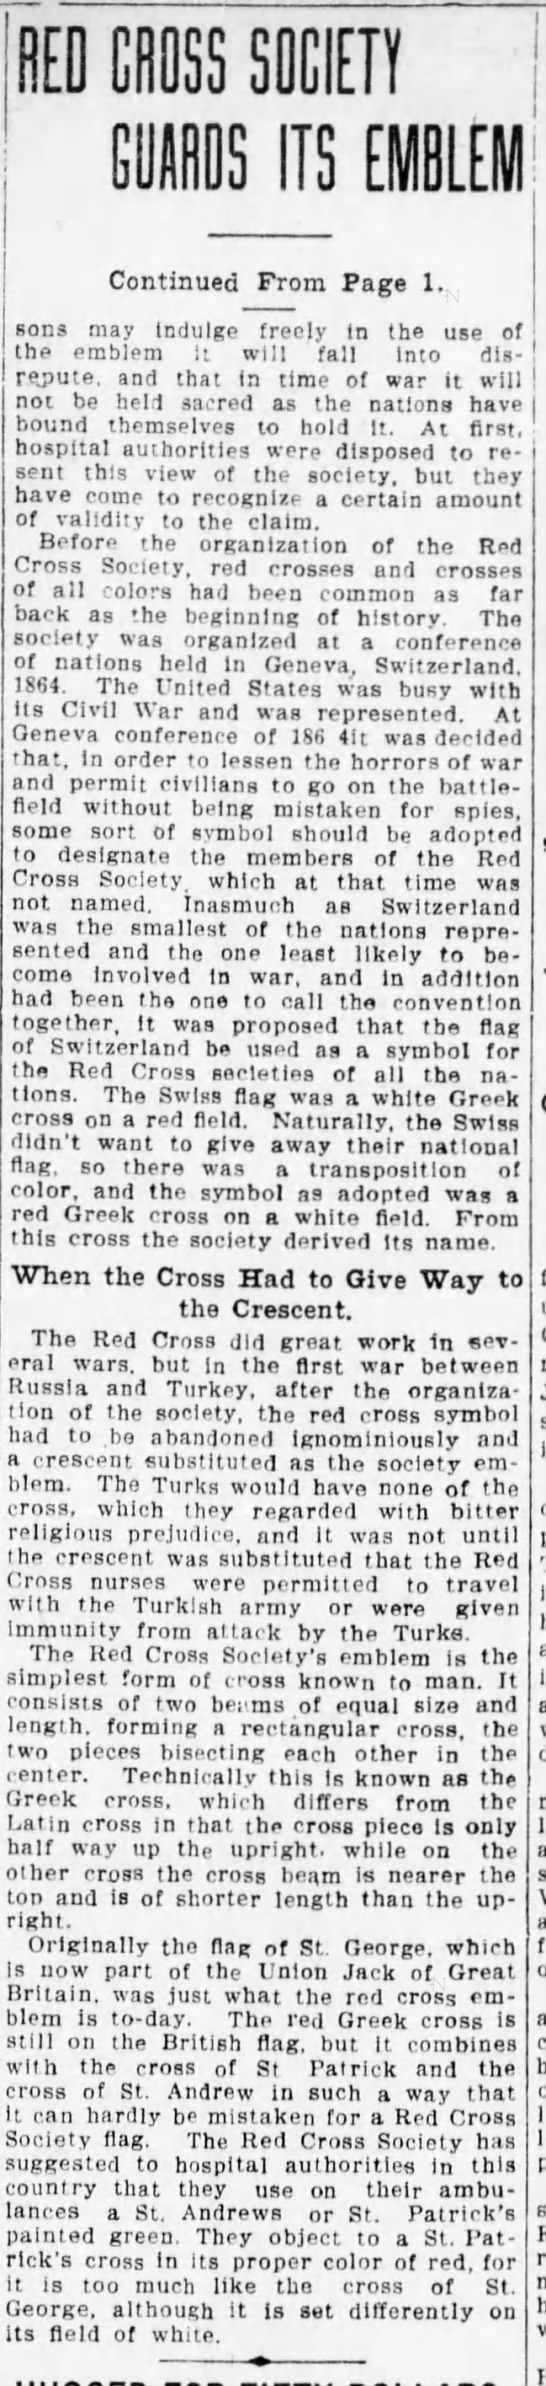 Heraldry Clipping: (Part 2) Red Cross Society Guards Its Emblem - 